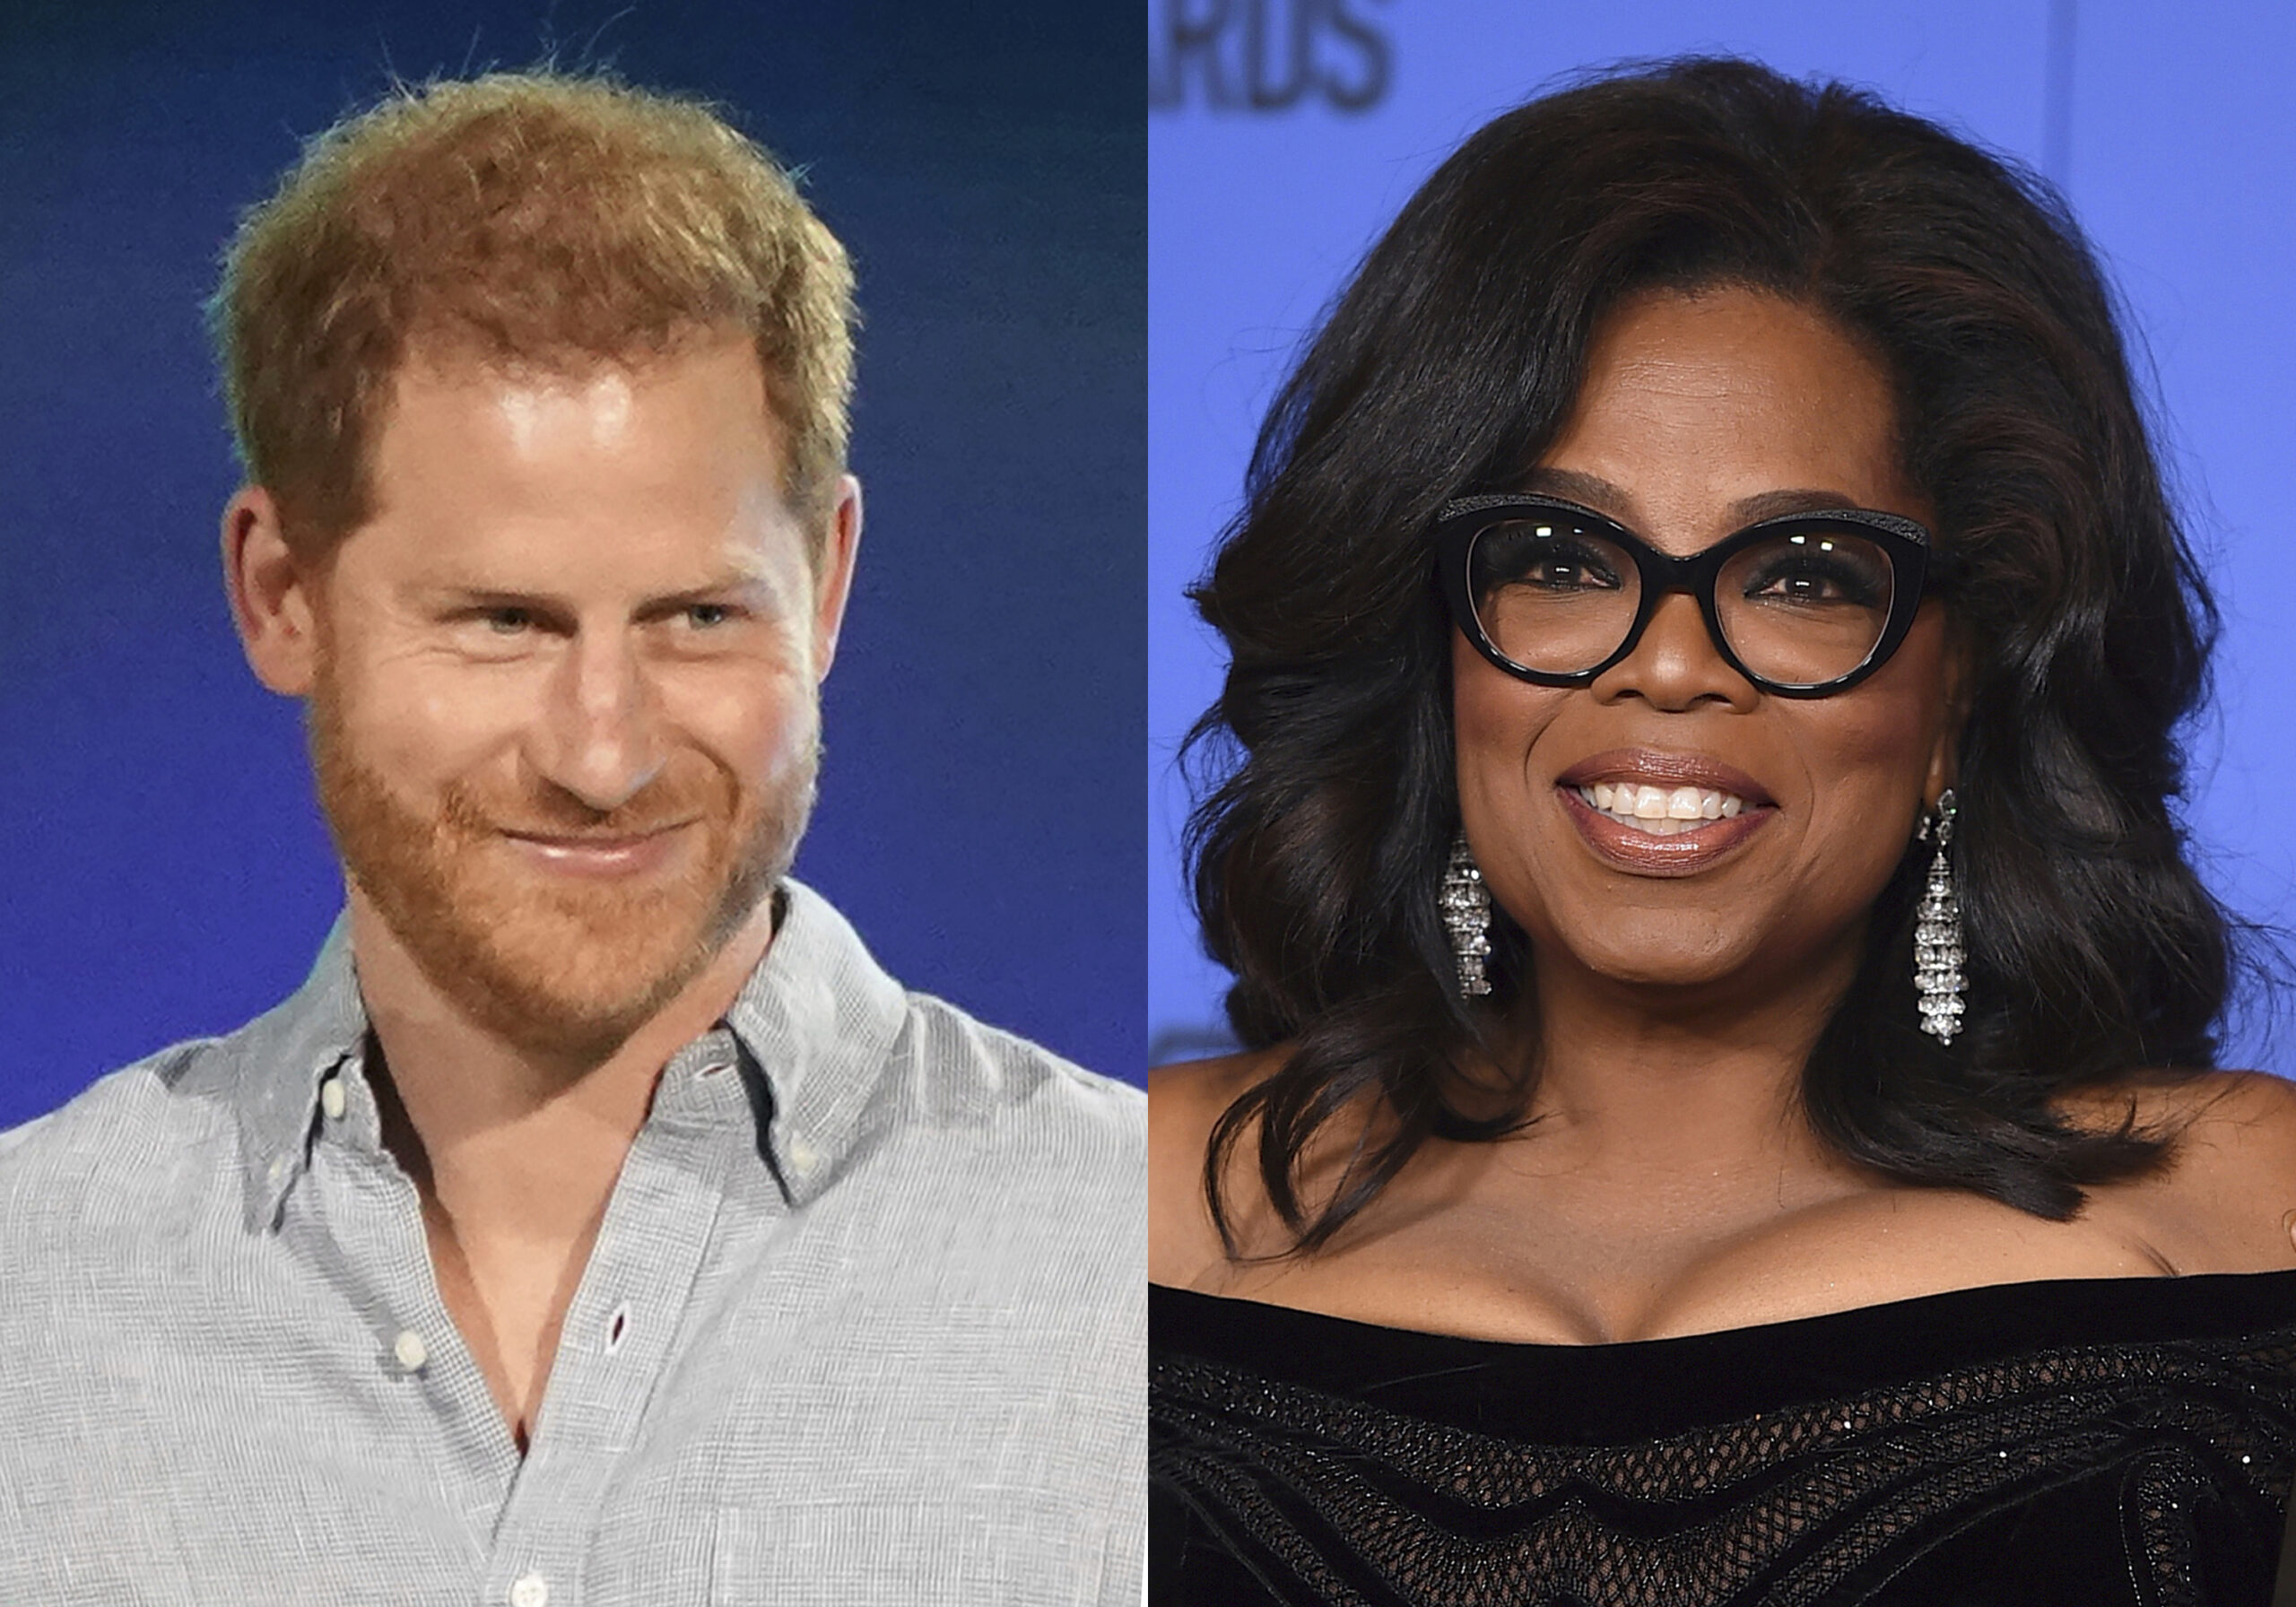 Prince Harry, Duke of Sussex speaks at "Vax Live: The Concert to Reunite the World" in Inglewood, Calif. on May 2, 2021, left, and Oprah Winfrey appears at the 75th annual Golden Globe Awards in Beverly Hills, Calif. on Jan. 7, 2018. Winfrey and Prince Harry's series "The Me You Can't See" will debut on May 21 on Apple TV+ plus. (AP Photo)